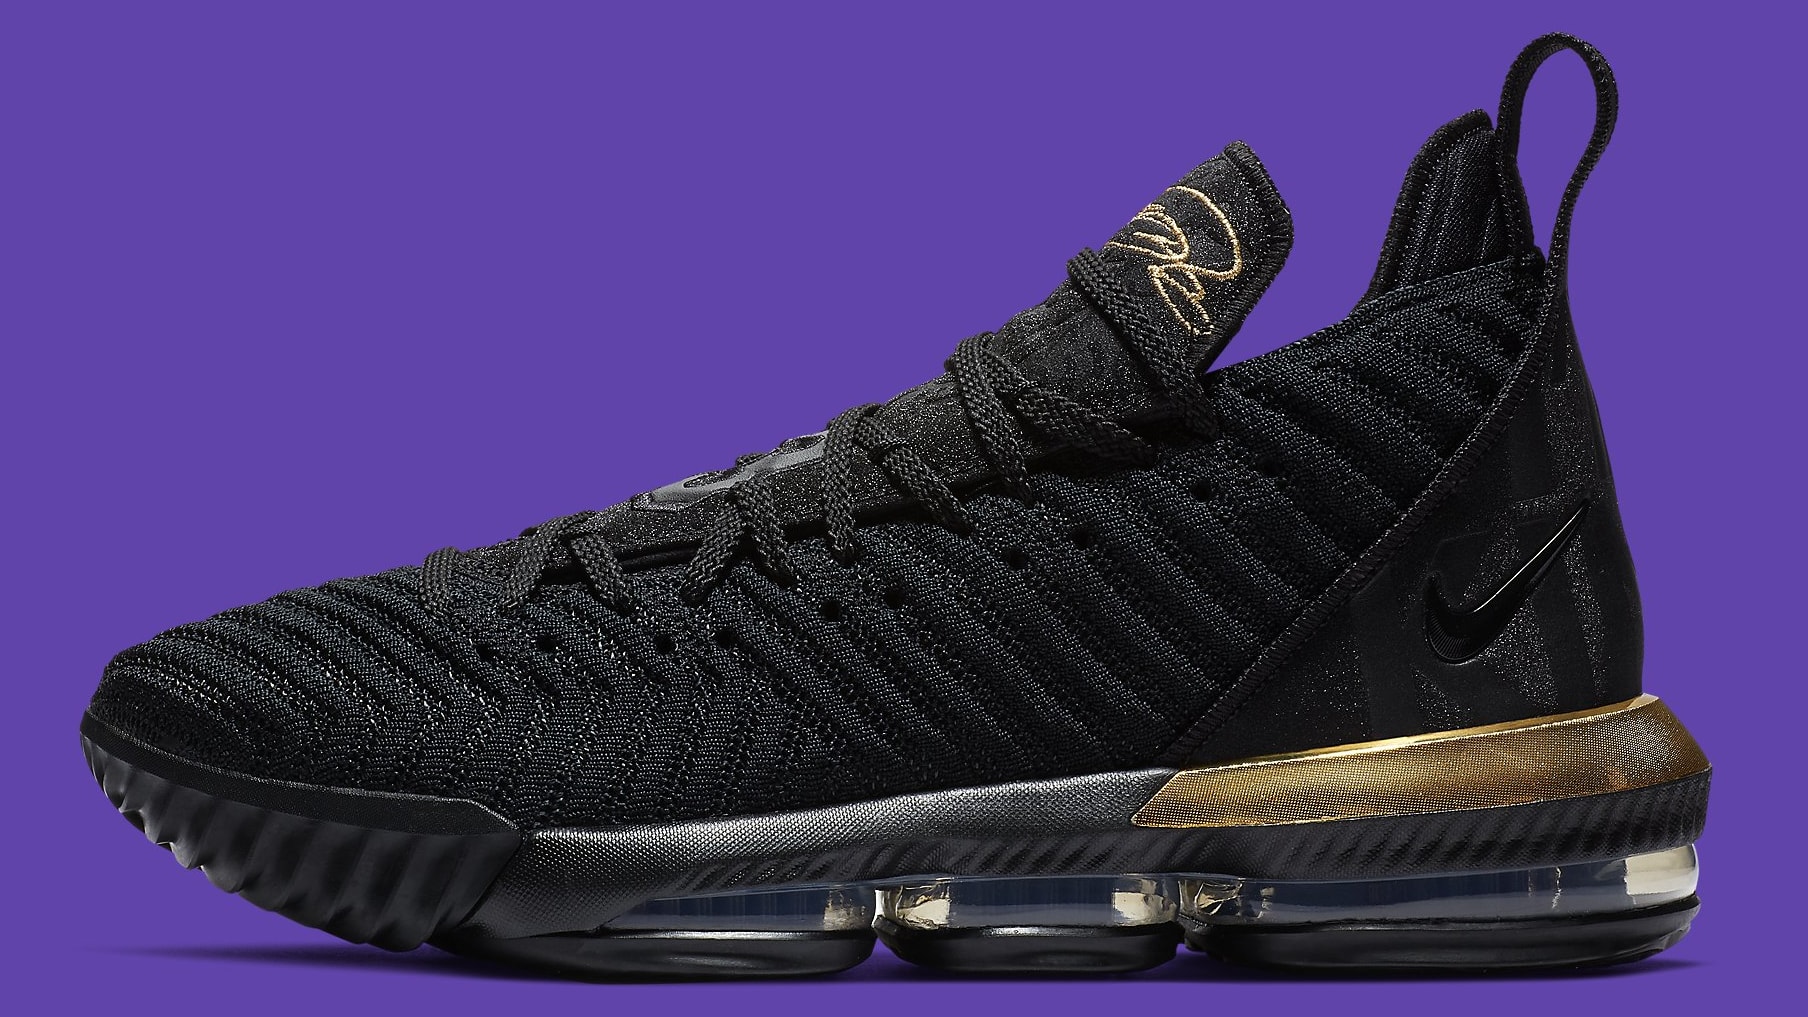 lebron 16 king black and gold